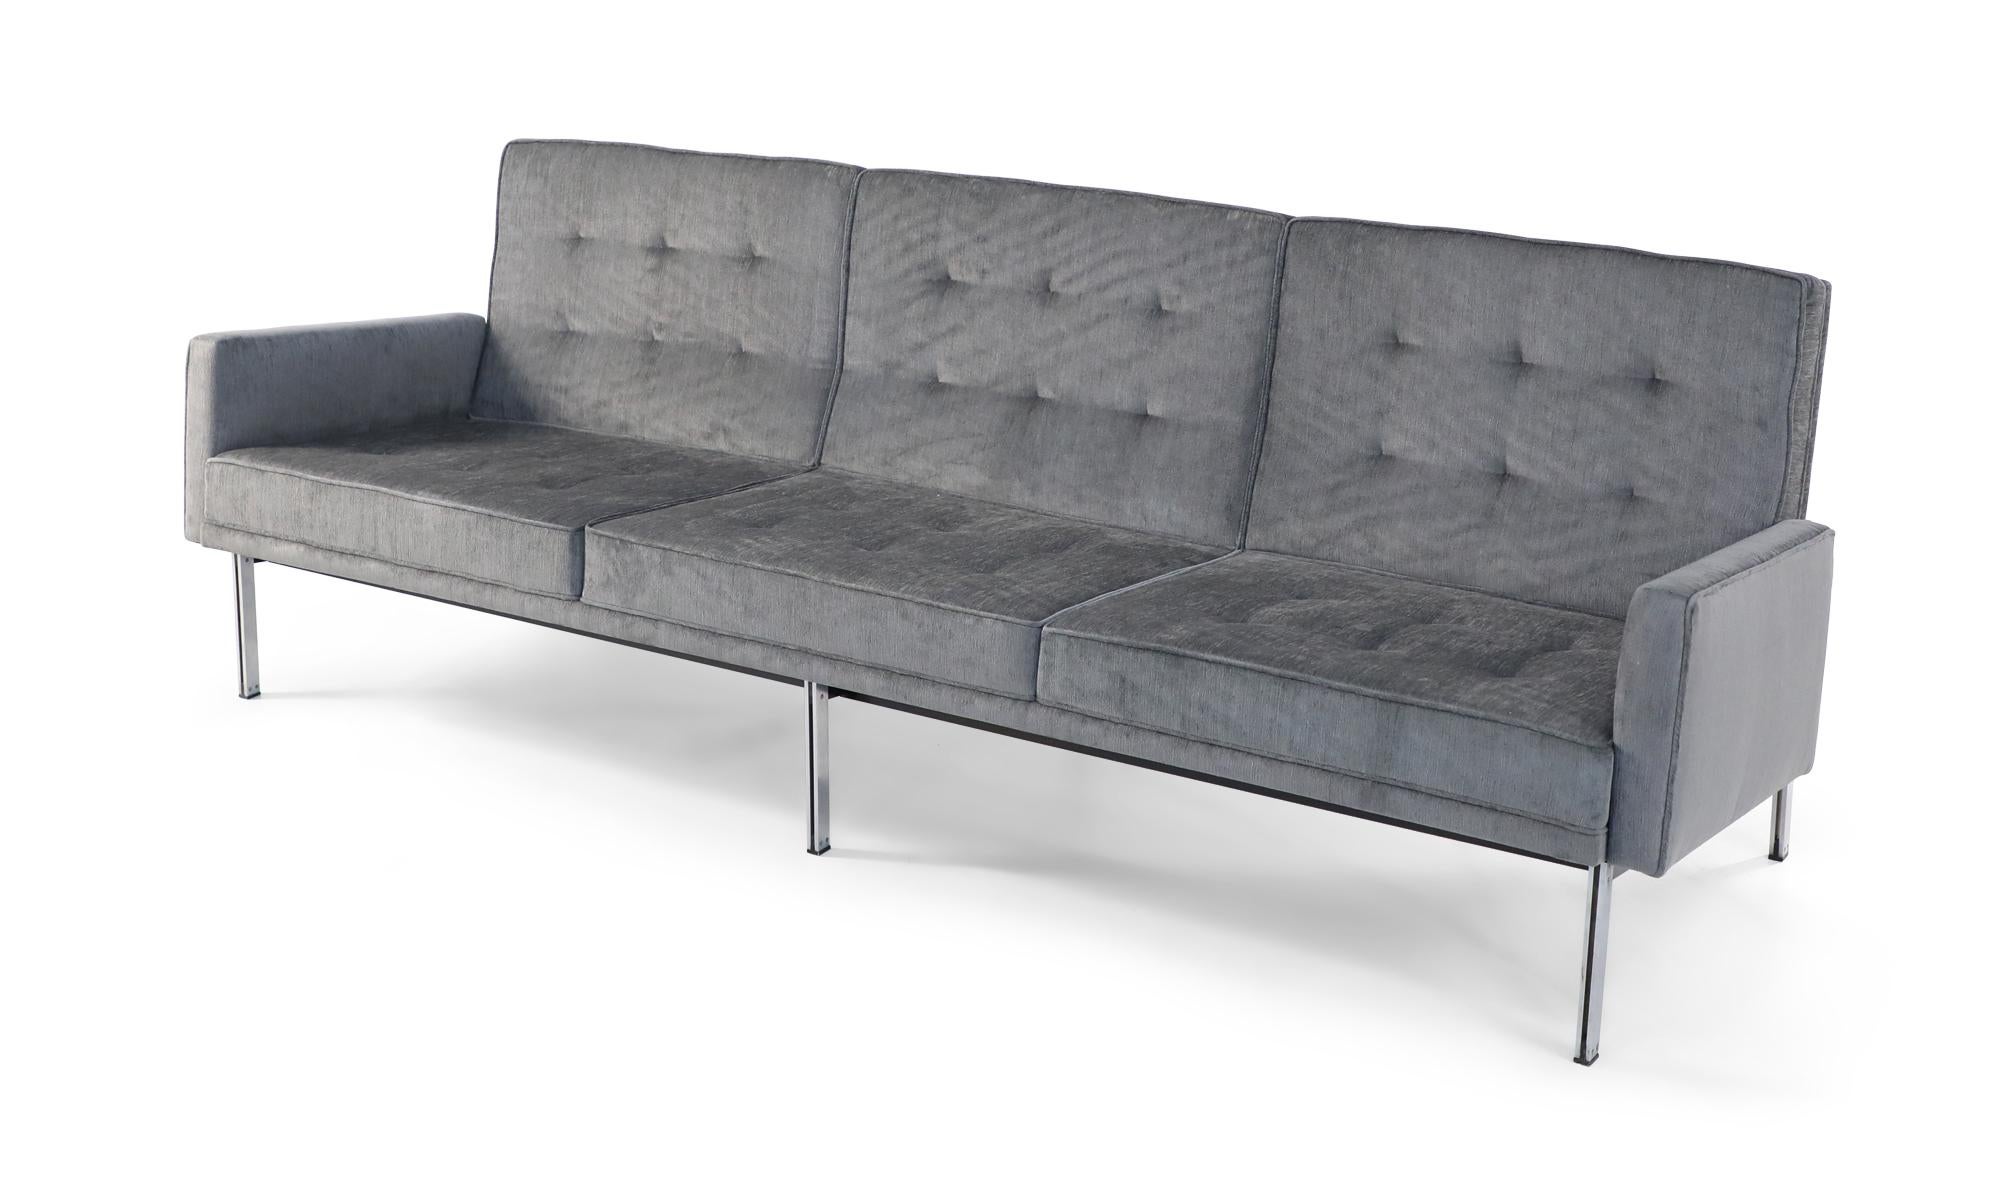 Mid-Century Modern three-seat sofa with gray sharkskin velvet upholstery, button-tufted back cushions, and a chrome-plated steel frame. (FLORENCE KNOLL).